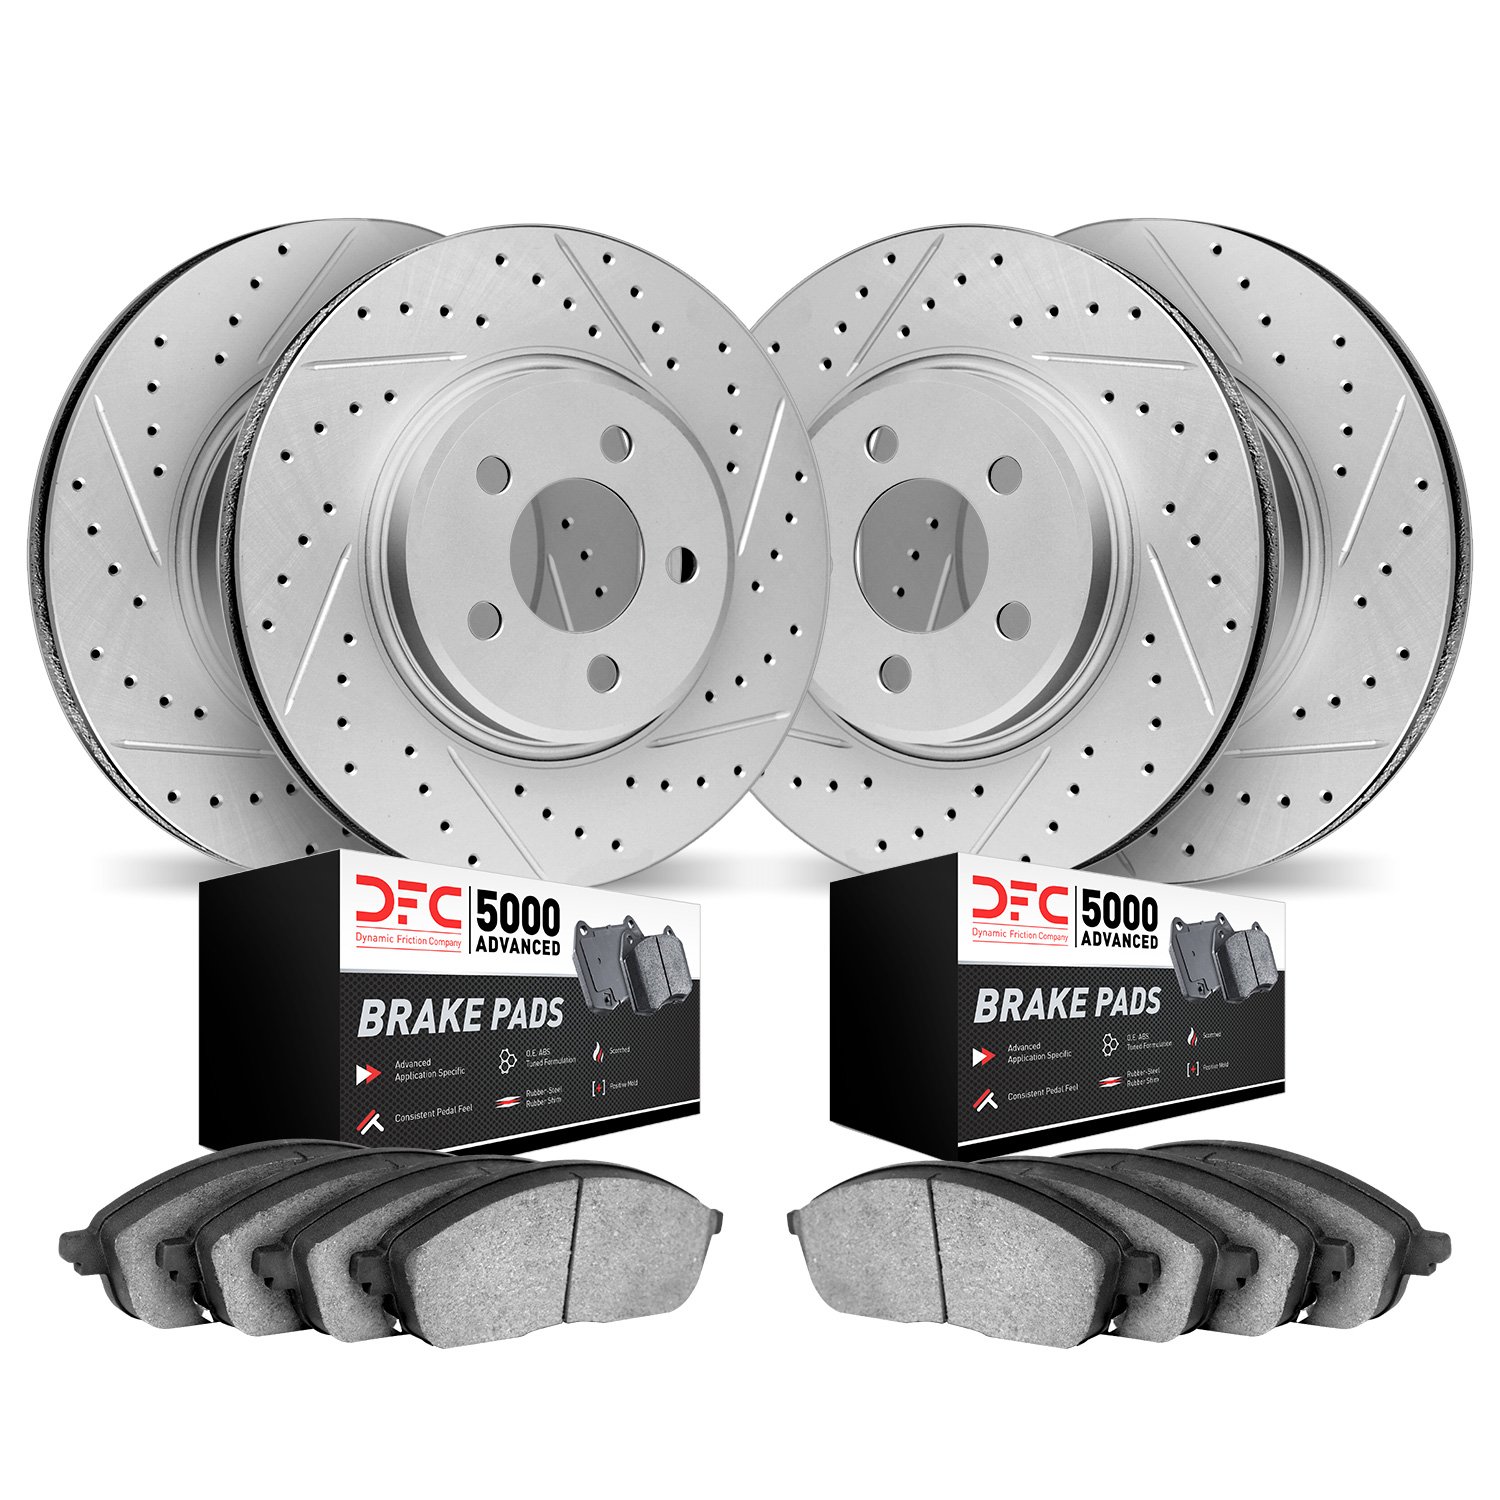 2504-80020 Geoperformance Drilled/Slotted Rotors w/5000 Advanced Brake Pads Kit, 2004-2008 Ford/Lincoln/Mercury/Mazda, Position: